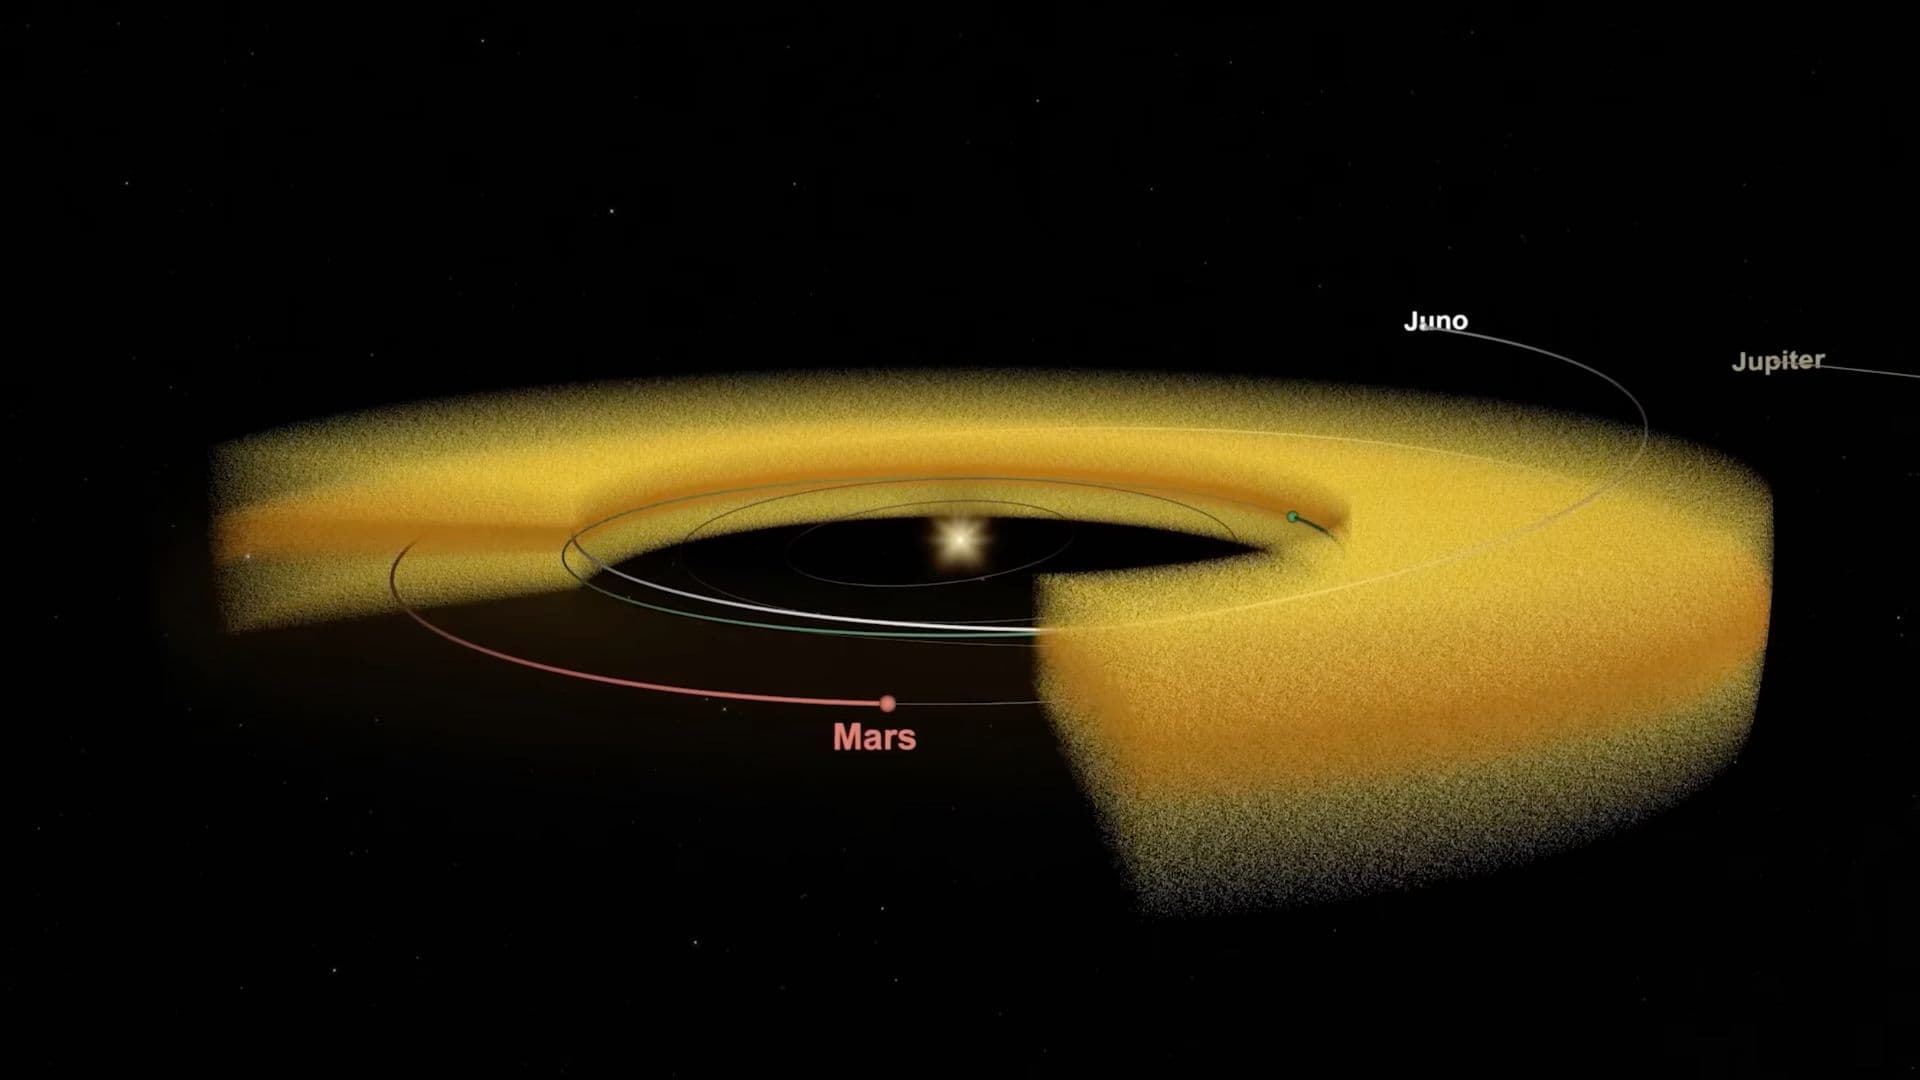 Interplanetary dust particles orbit the Sun in the same plane as the planets do